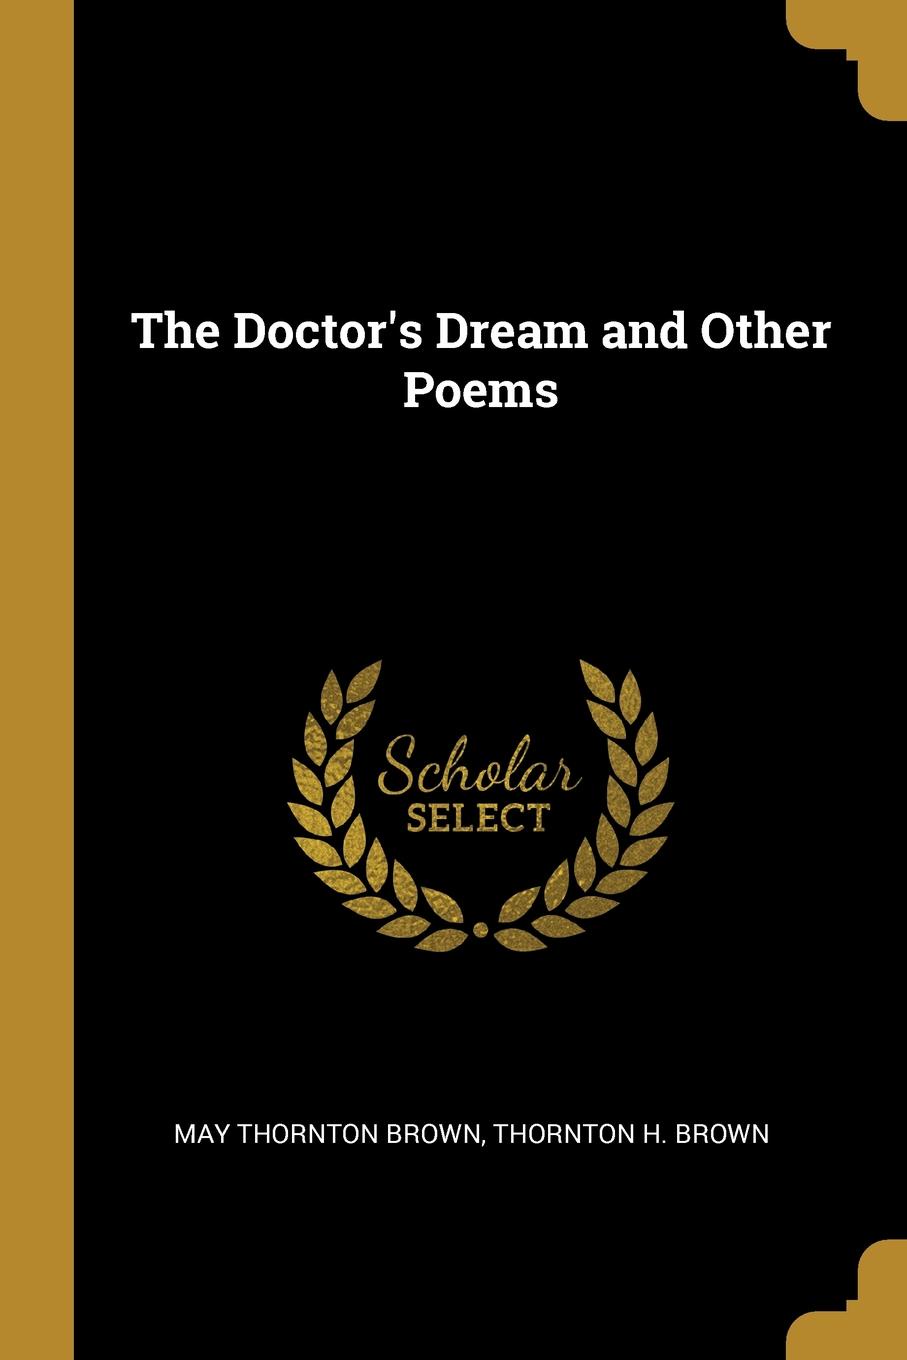 The Doctor.s Dream and Other Poems